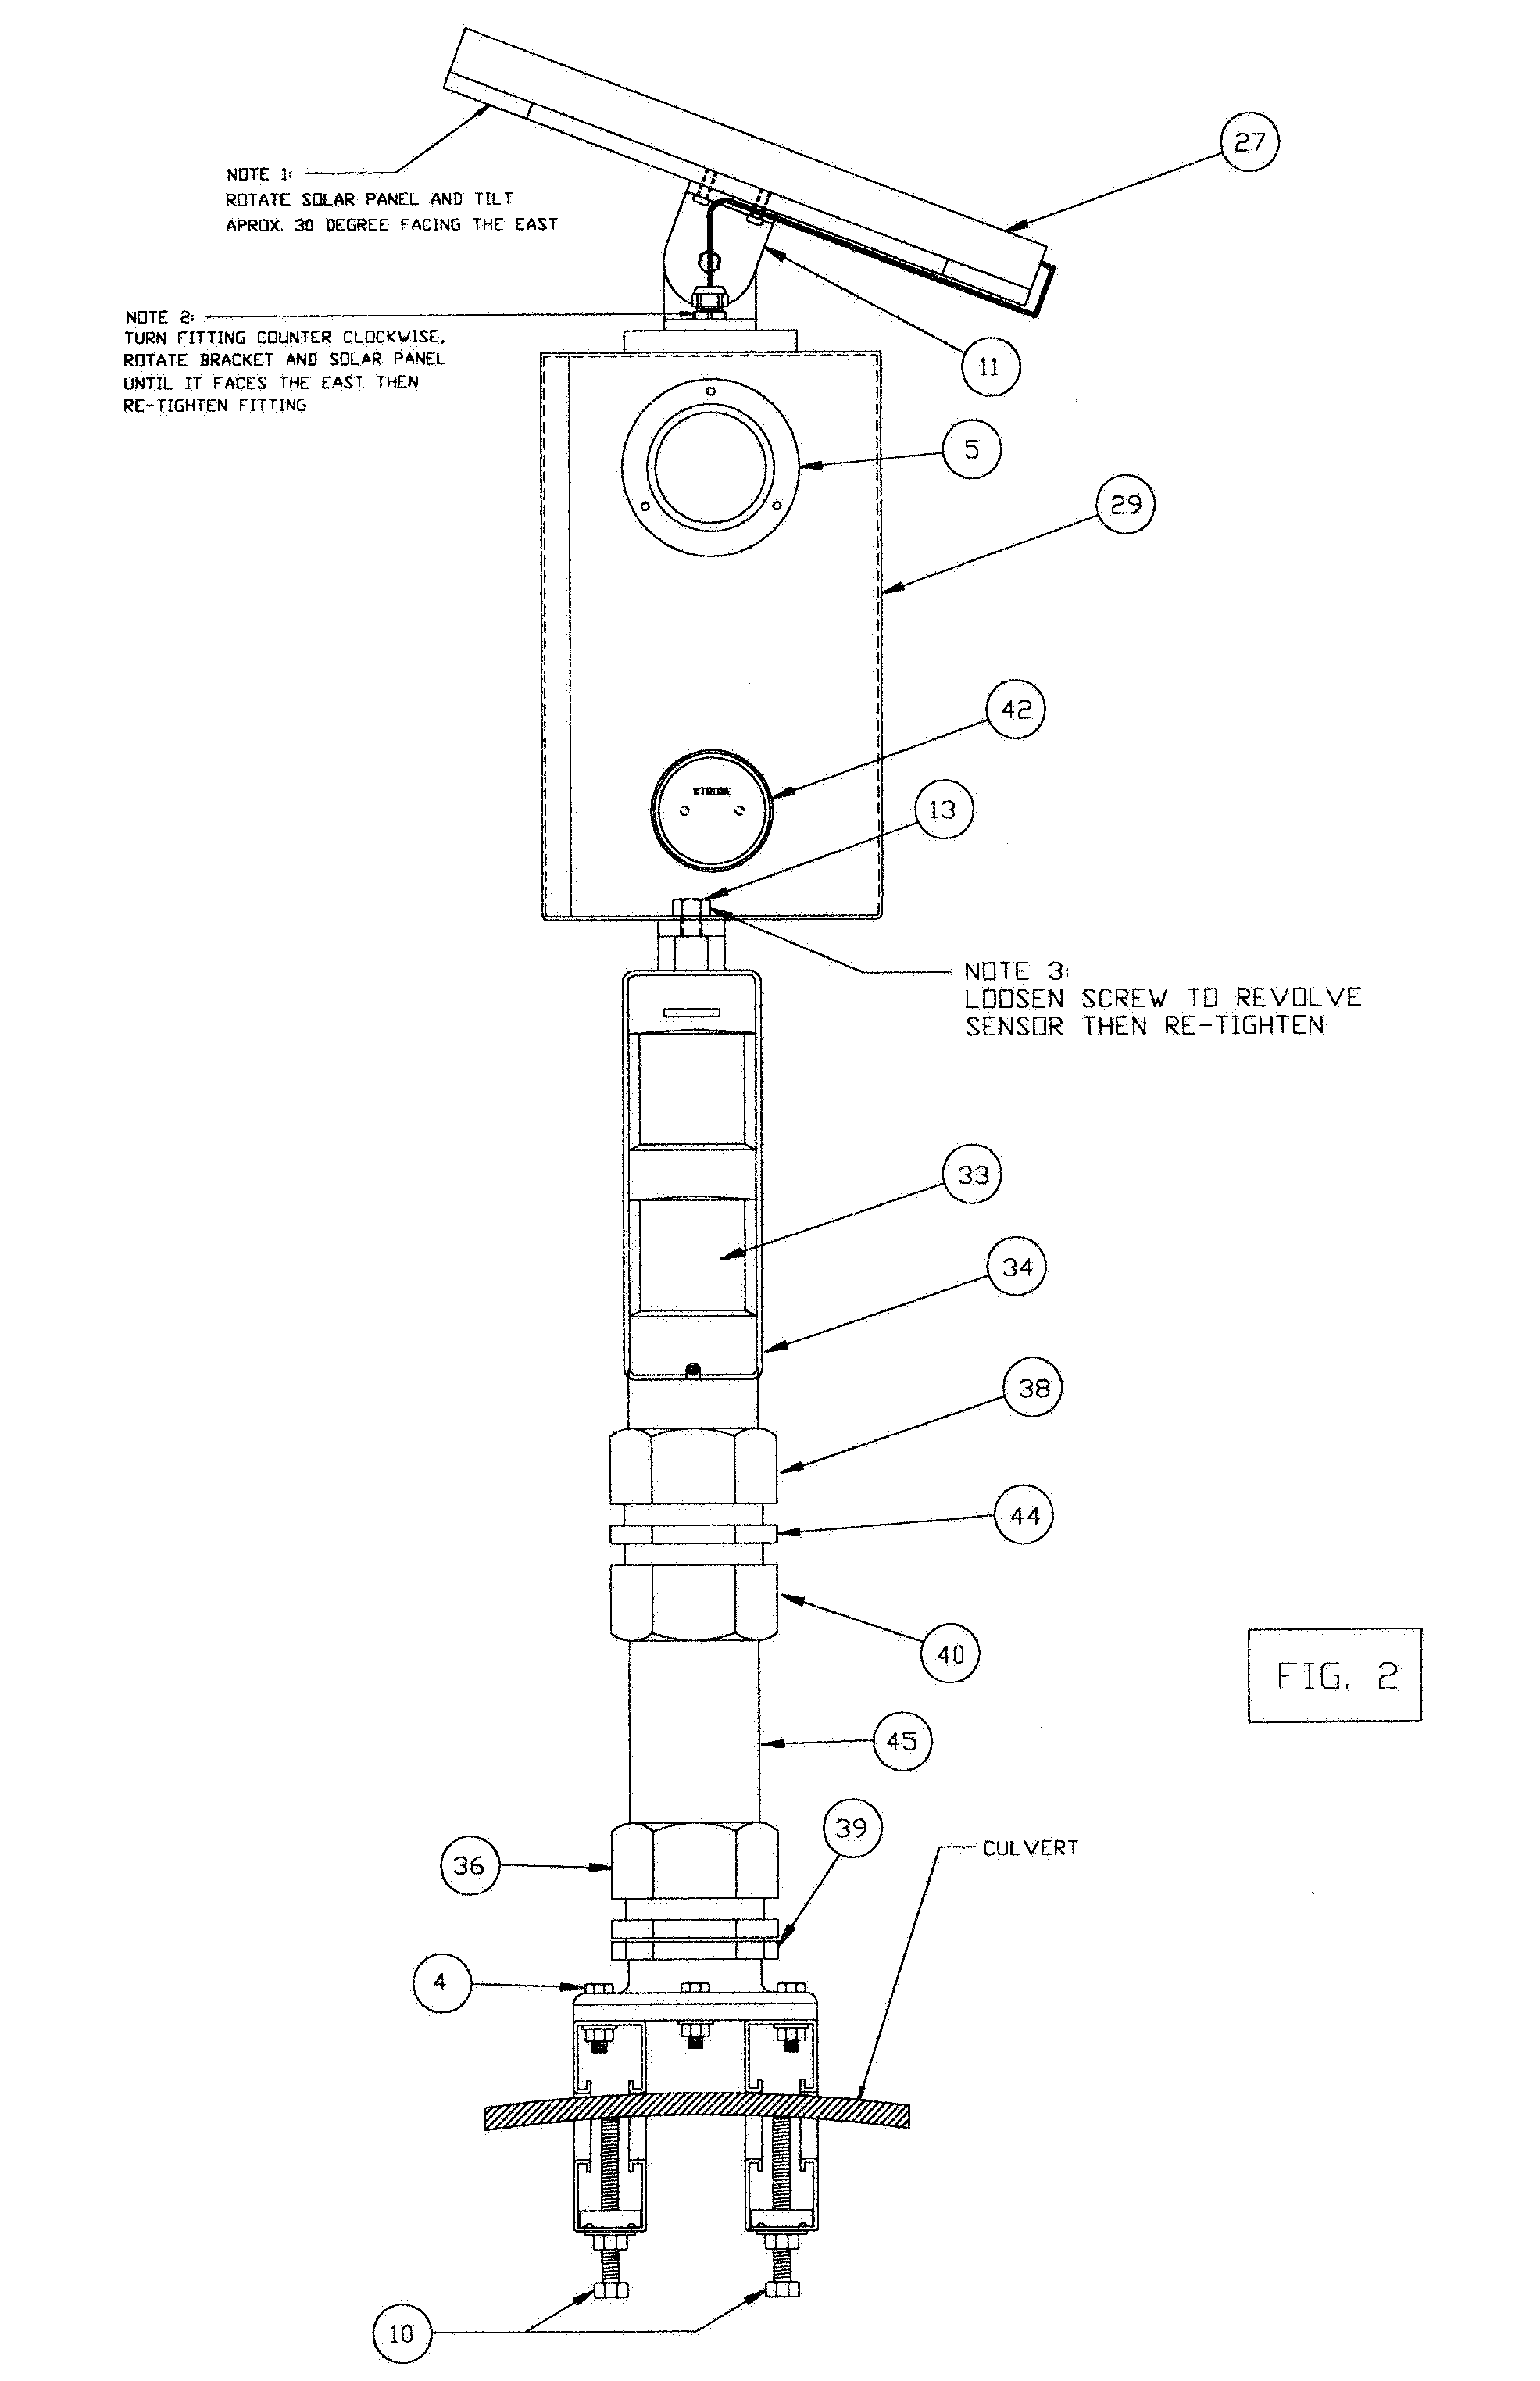 Animal deterrent apparatus for mounting to a culvert